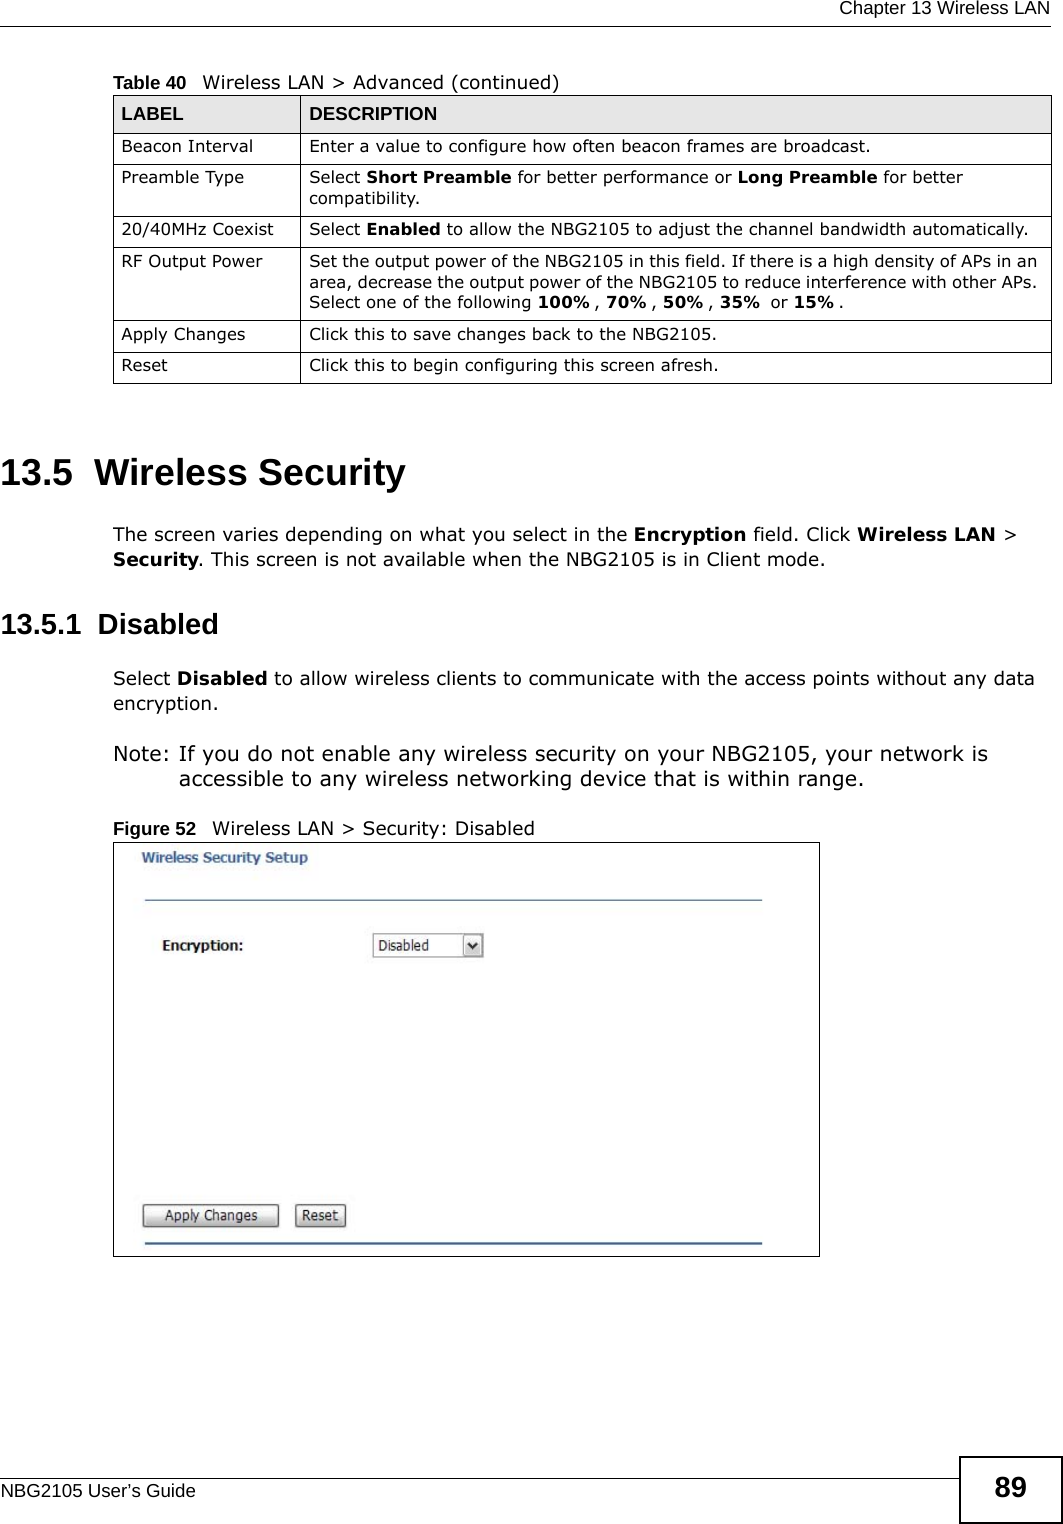  Chapter 13 Wireless LANNBG2105 User’s Guide 8913.5  Wireless SecurityThe screen varies depending on what you select in the Encryption field. Click Wireless LAN &gt; Security. This screen is not available when the NBG2105 is in Client mode.13.5.1  DisabledSelect Disabled to allow wireless clients to communicate with the access points without any data encryption.Note: If you do not enable any wireless security on your NBG2105, your network is accessible to any wireless networking device that is within range.Figure 52   Wireless LAN &gt; Security: Disabled Beacon Interval Enter a value to configure how often beacon frames are broadcast.Preamble Type Select Short Preamble for better performance or Long Preamble for better compatibility.20/40MHz Coexist Select Enabled to allow the NBG2105 to adjust the channel bandwidth automatically.RF Output Power Set the output power of the NBG2105 in this field. If there is a high density of APs in an area, decrease the output power of the NBG2105 to reduce interference with other APs. Select one of the following 100%, 70%, 50%, 35% or 15%.Apply Changes Click this to save changes back to the NBG2105.Reset Click this to begin configuring this screen afresh.Table 40   Wireless LAN &gt; Advanced (continued)LABEL DESCRIPTION